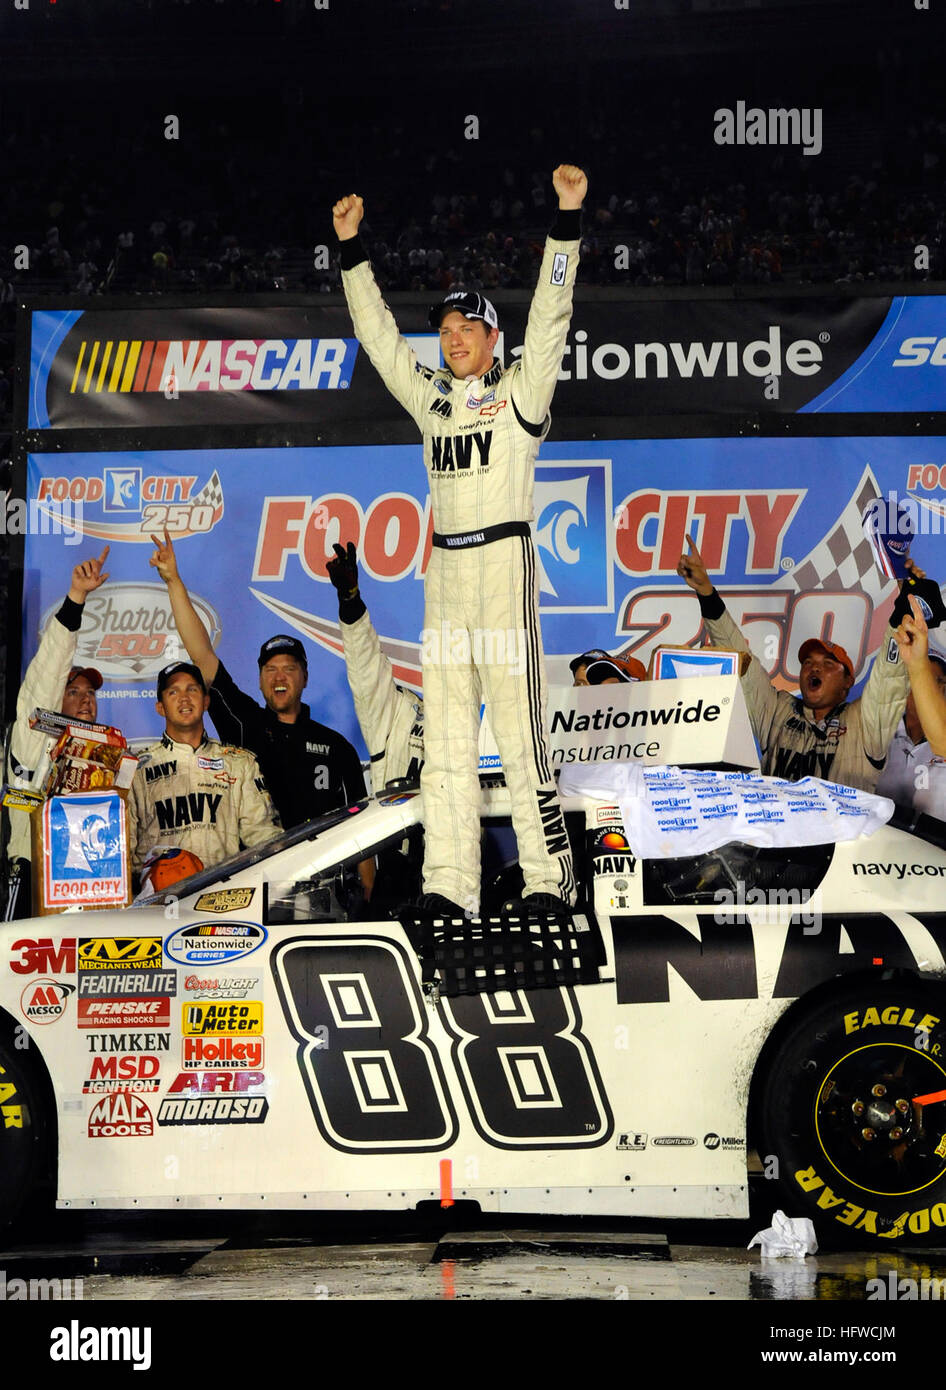 080822-N-5345W-213 BRISTOL, Tenn. (Aug. 22, 2008) JR Motorsports driver Brad Keselowski celebrates on top of the No. 88 U.S. Navy Chevrolet Monte Carlo along with his crew in victory lane after winning the NASCAR Nationwide Series Food City 250 at Bristol Motor Speedway in Bristol. Keselowski overcame a 37th place starting position to claim his second career victory and won second place overall in the nationwide championship standings. (U.S. Navy photo by Mass Communication Specialist 2nd Class Kristopher S. Wilson/Released) US Navy 080822-N-5345W-213 R Motorsports driver Brad Keselowski celeb Stock Photo